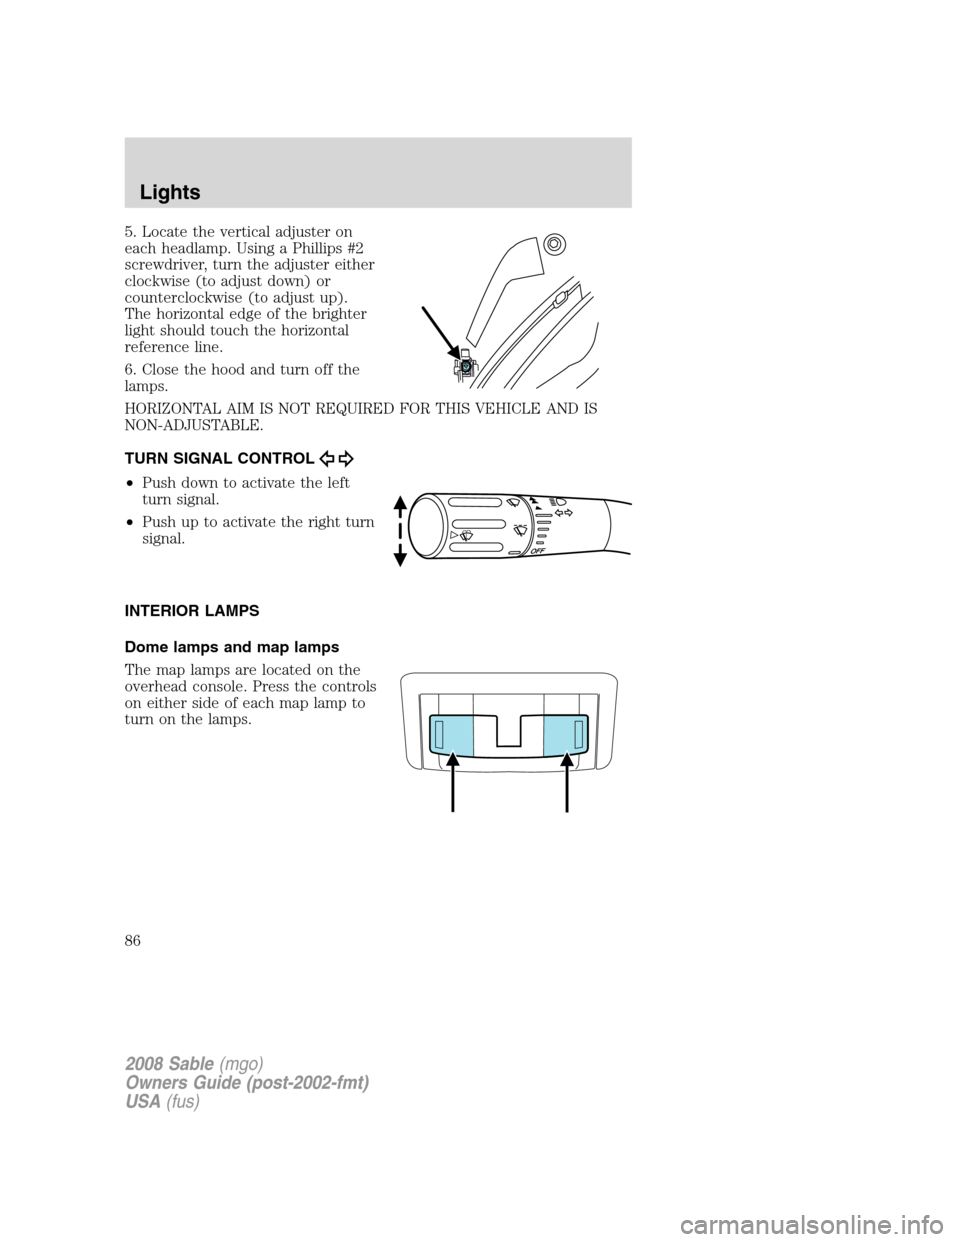 Mercury Sable 2008  Owners Manuals 5. Locate the vertical adjuster on
each headlamp. Using a Phillips #2
screwdriver, turn the adjuster either
clockwise (to adjust down) or
counterclockwise (to adjust up).
The horizontal edge of the br